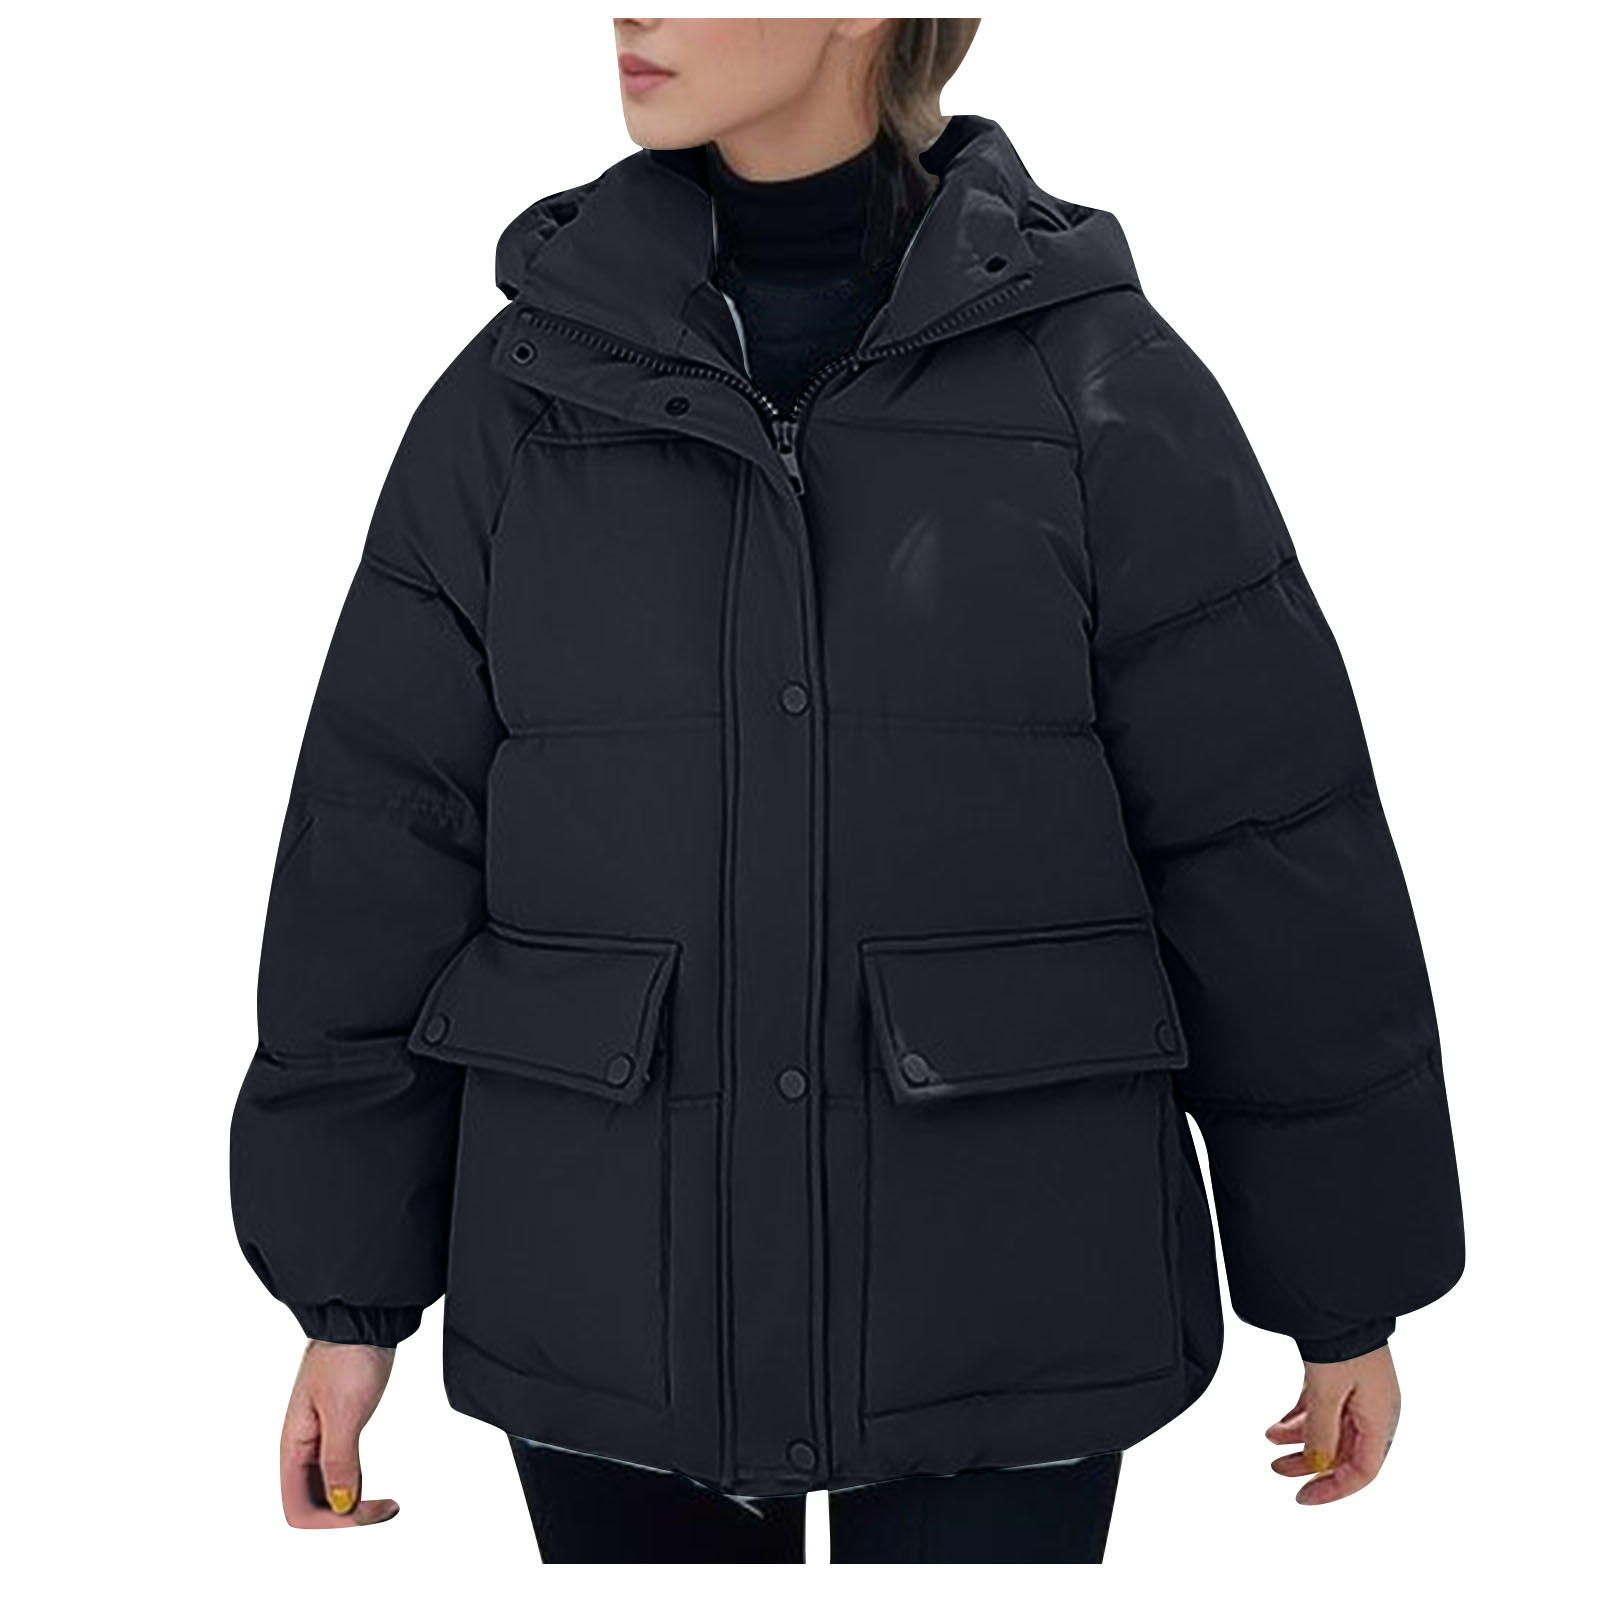 Black and Friday Deals Hueook Winter Warm Down Jackets for women Plus ...